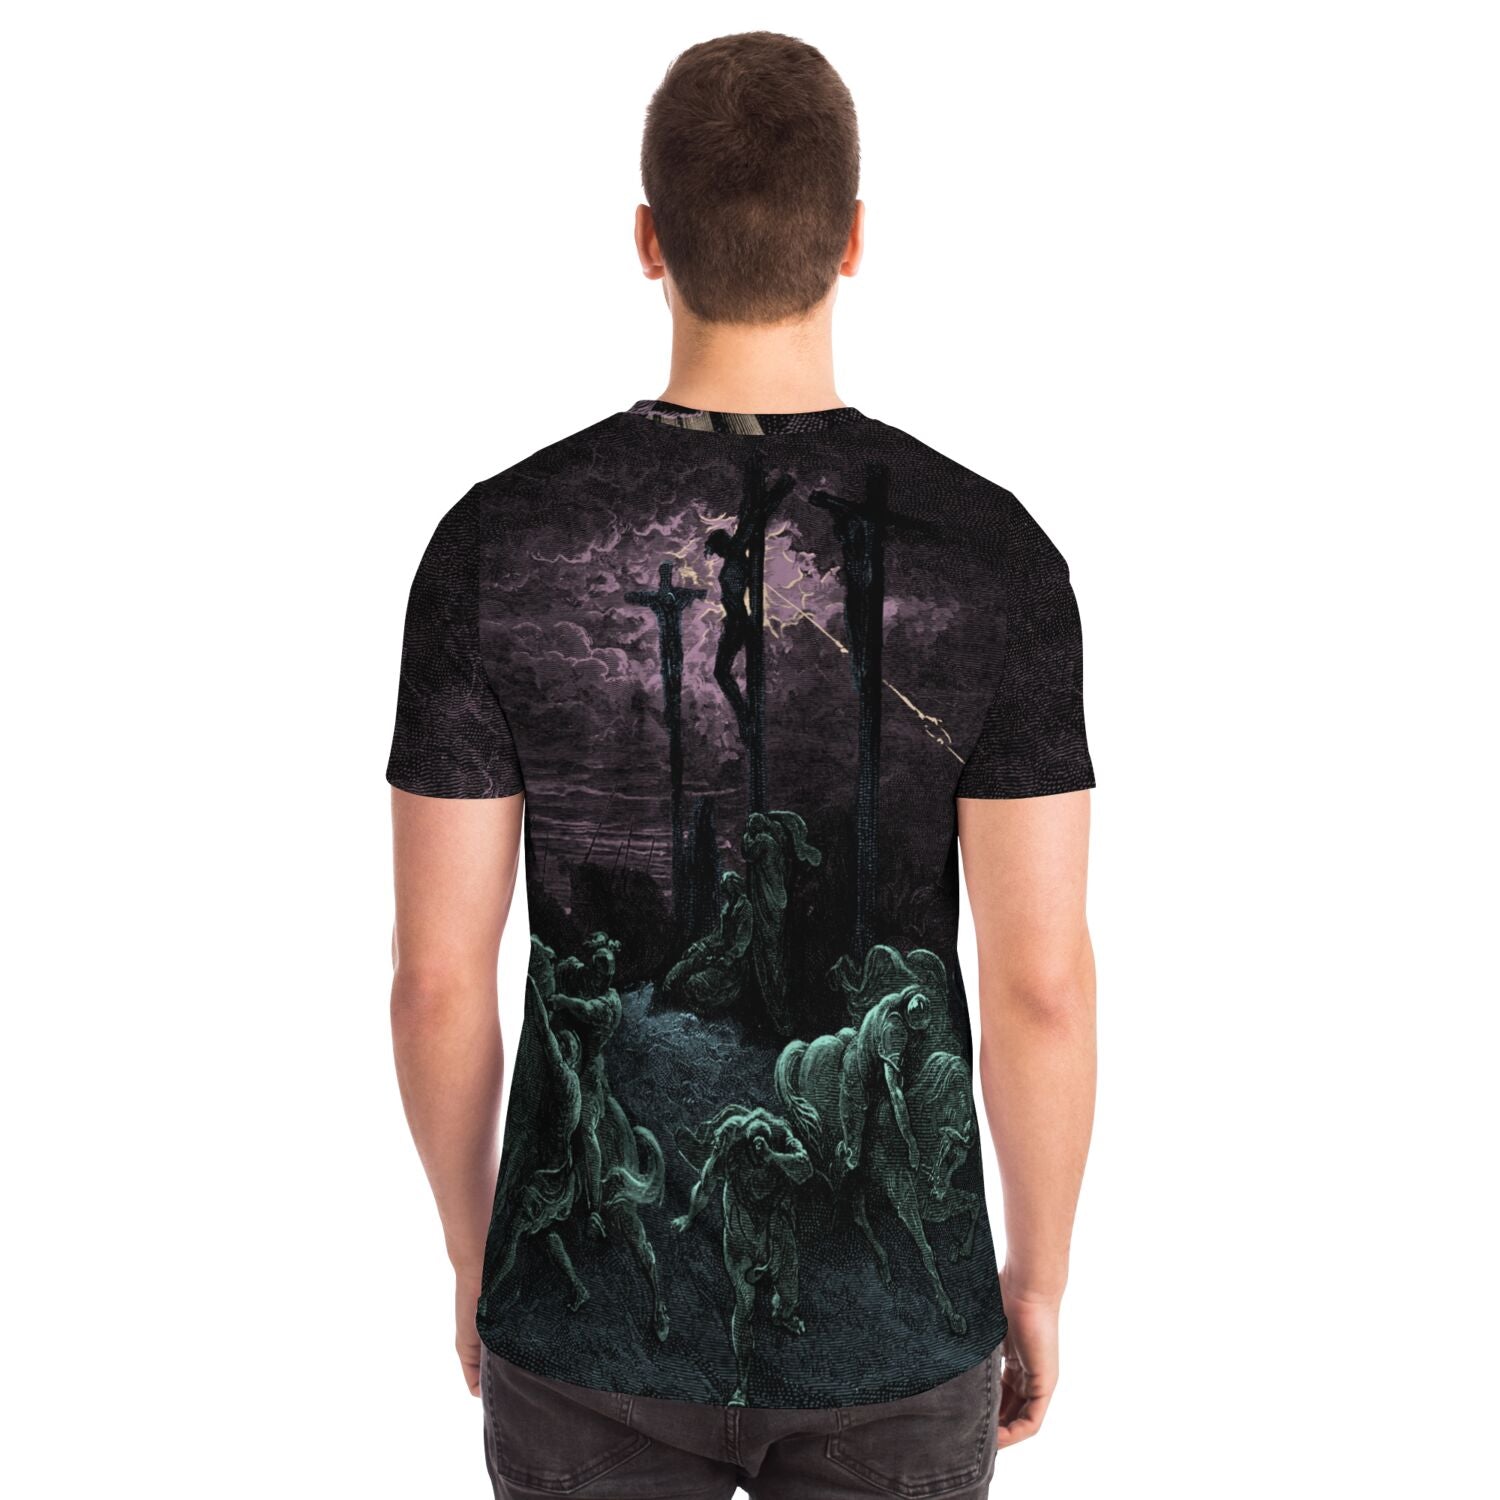 T-shirt The Crucifixion of Christ by Gustave Dore, Paradise Lost, Dante, Surreal Spiritual Graphic Art T-Shirt